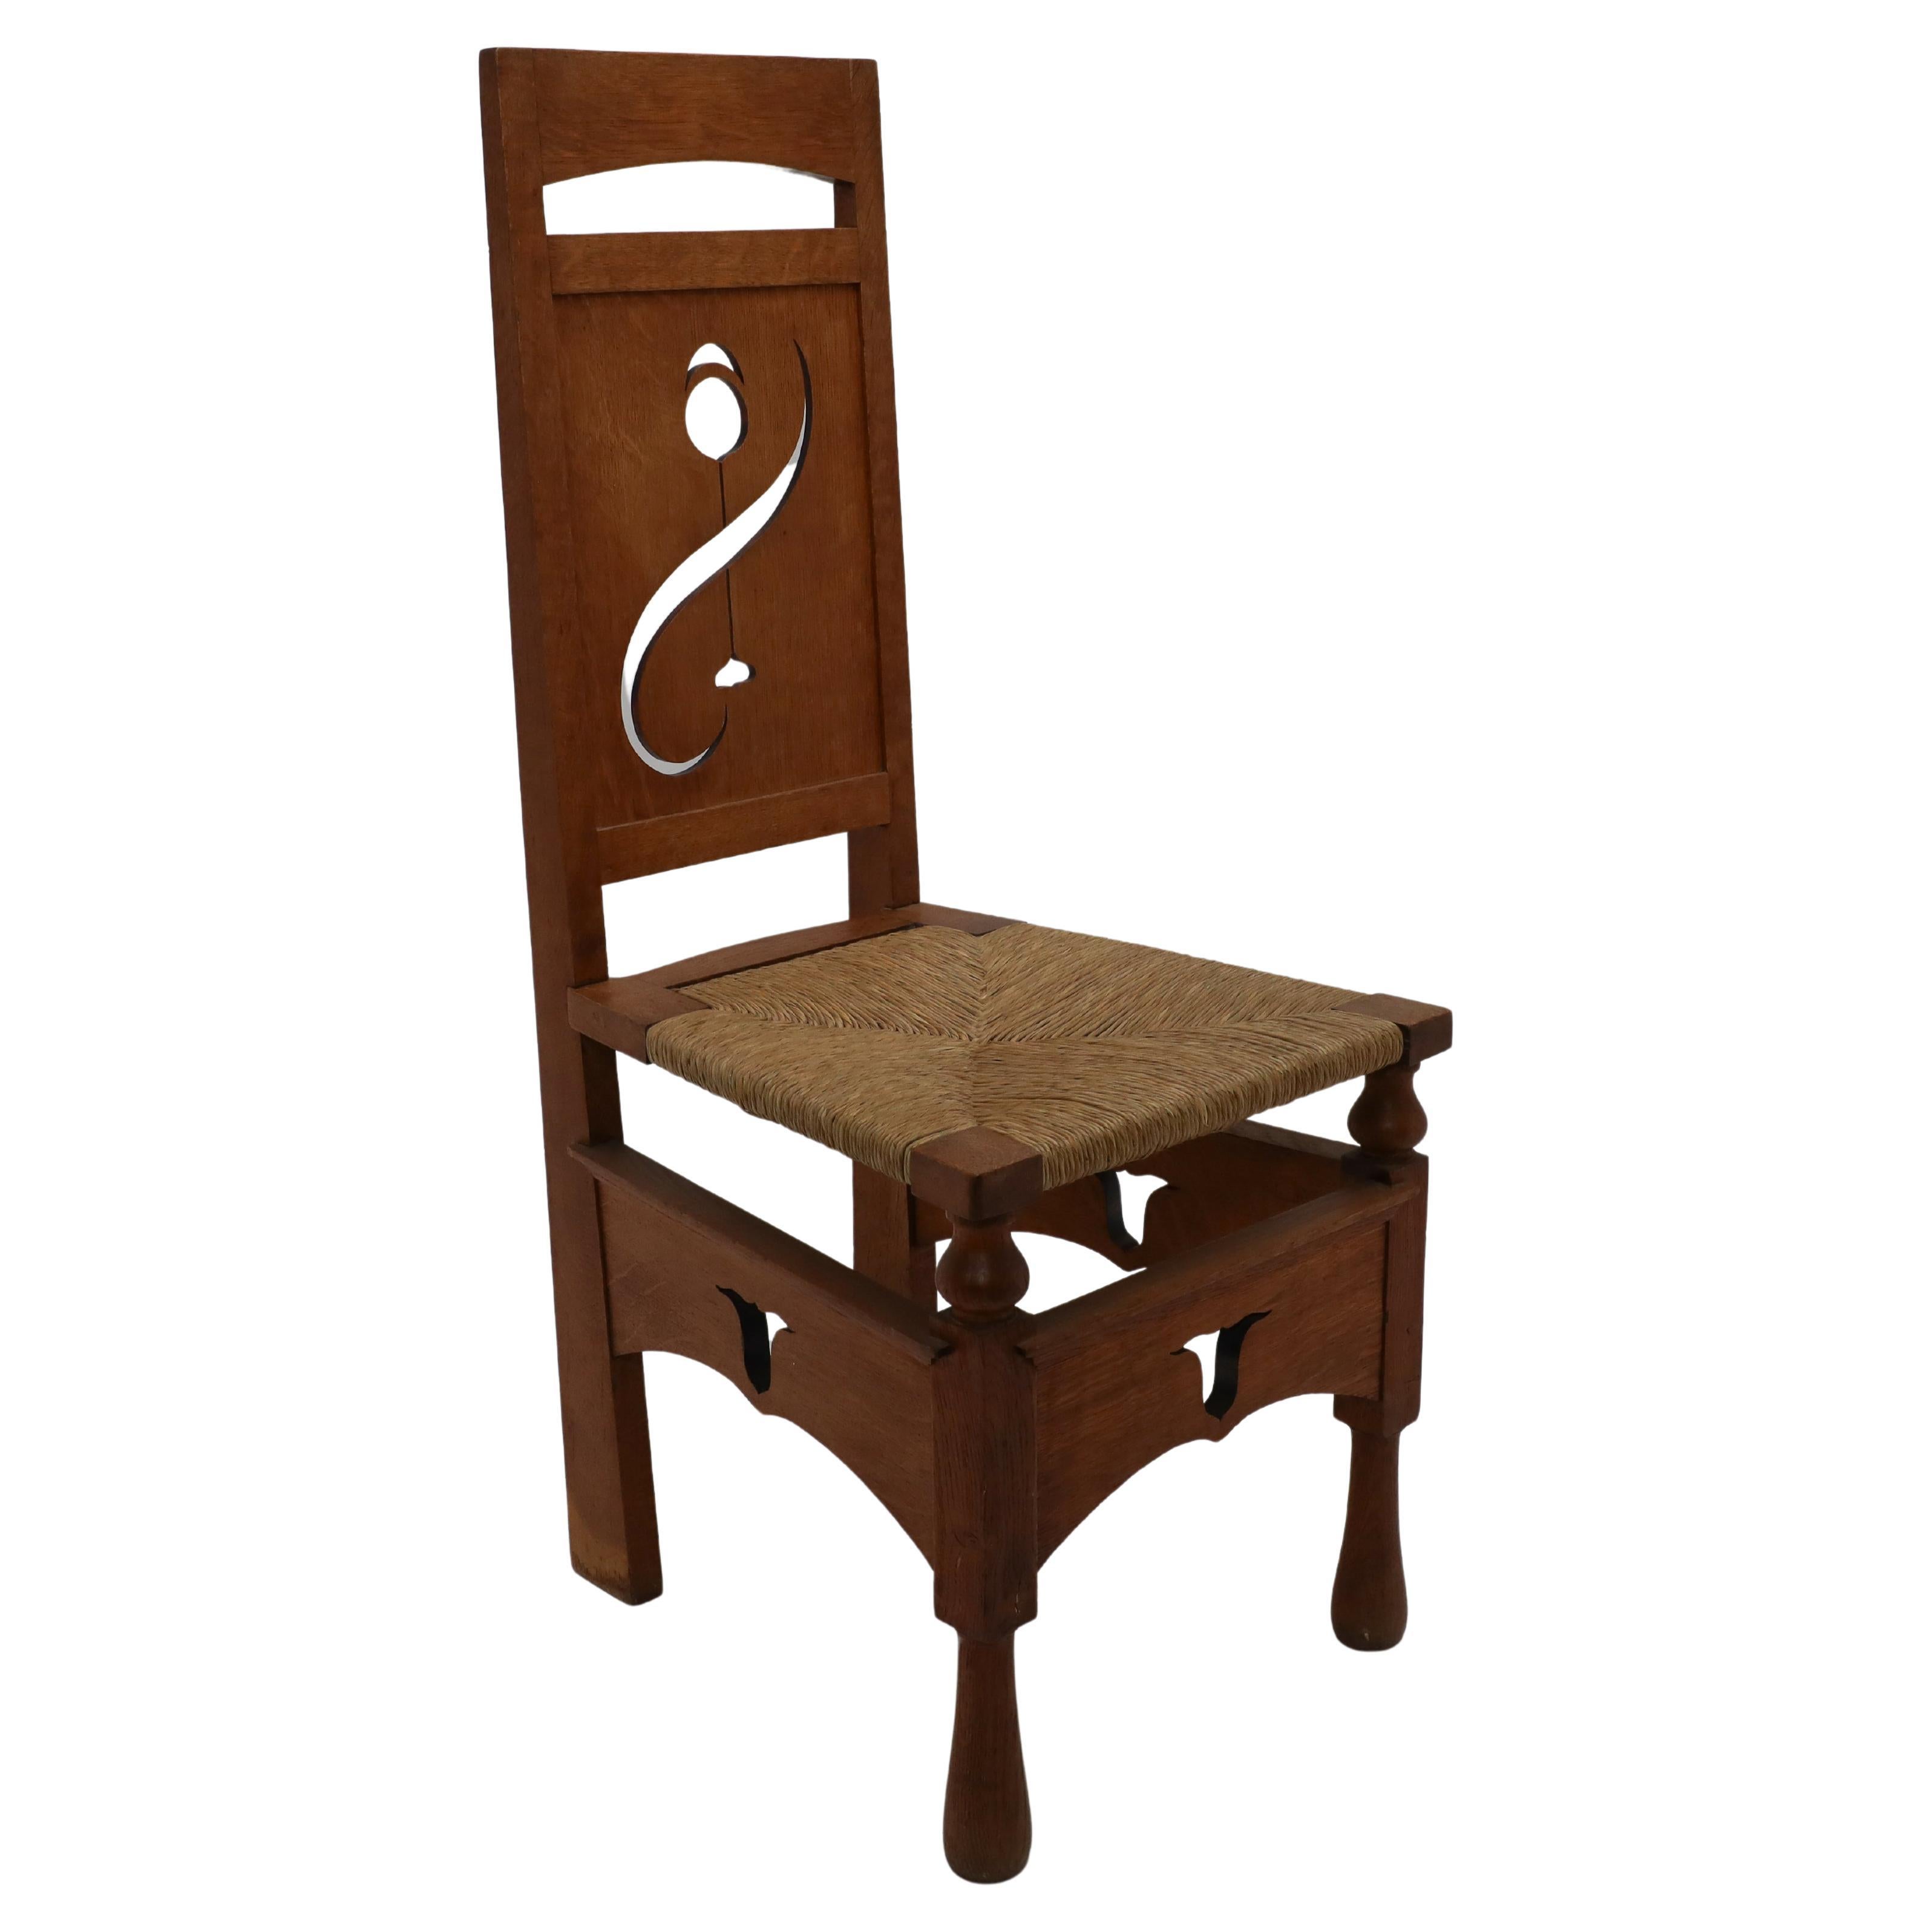 M H Baillie Scott attri An Arts & Crafts Oak Chair With Stylised Floral Cut-Outs For Sale